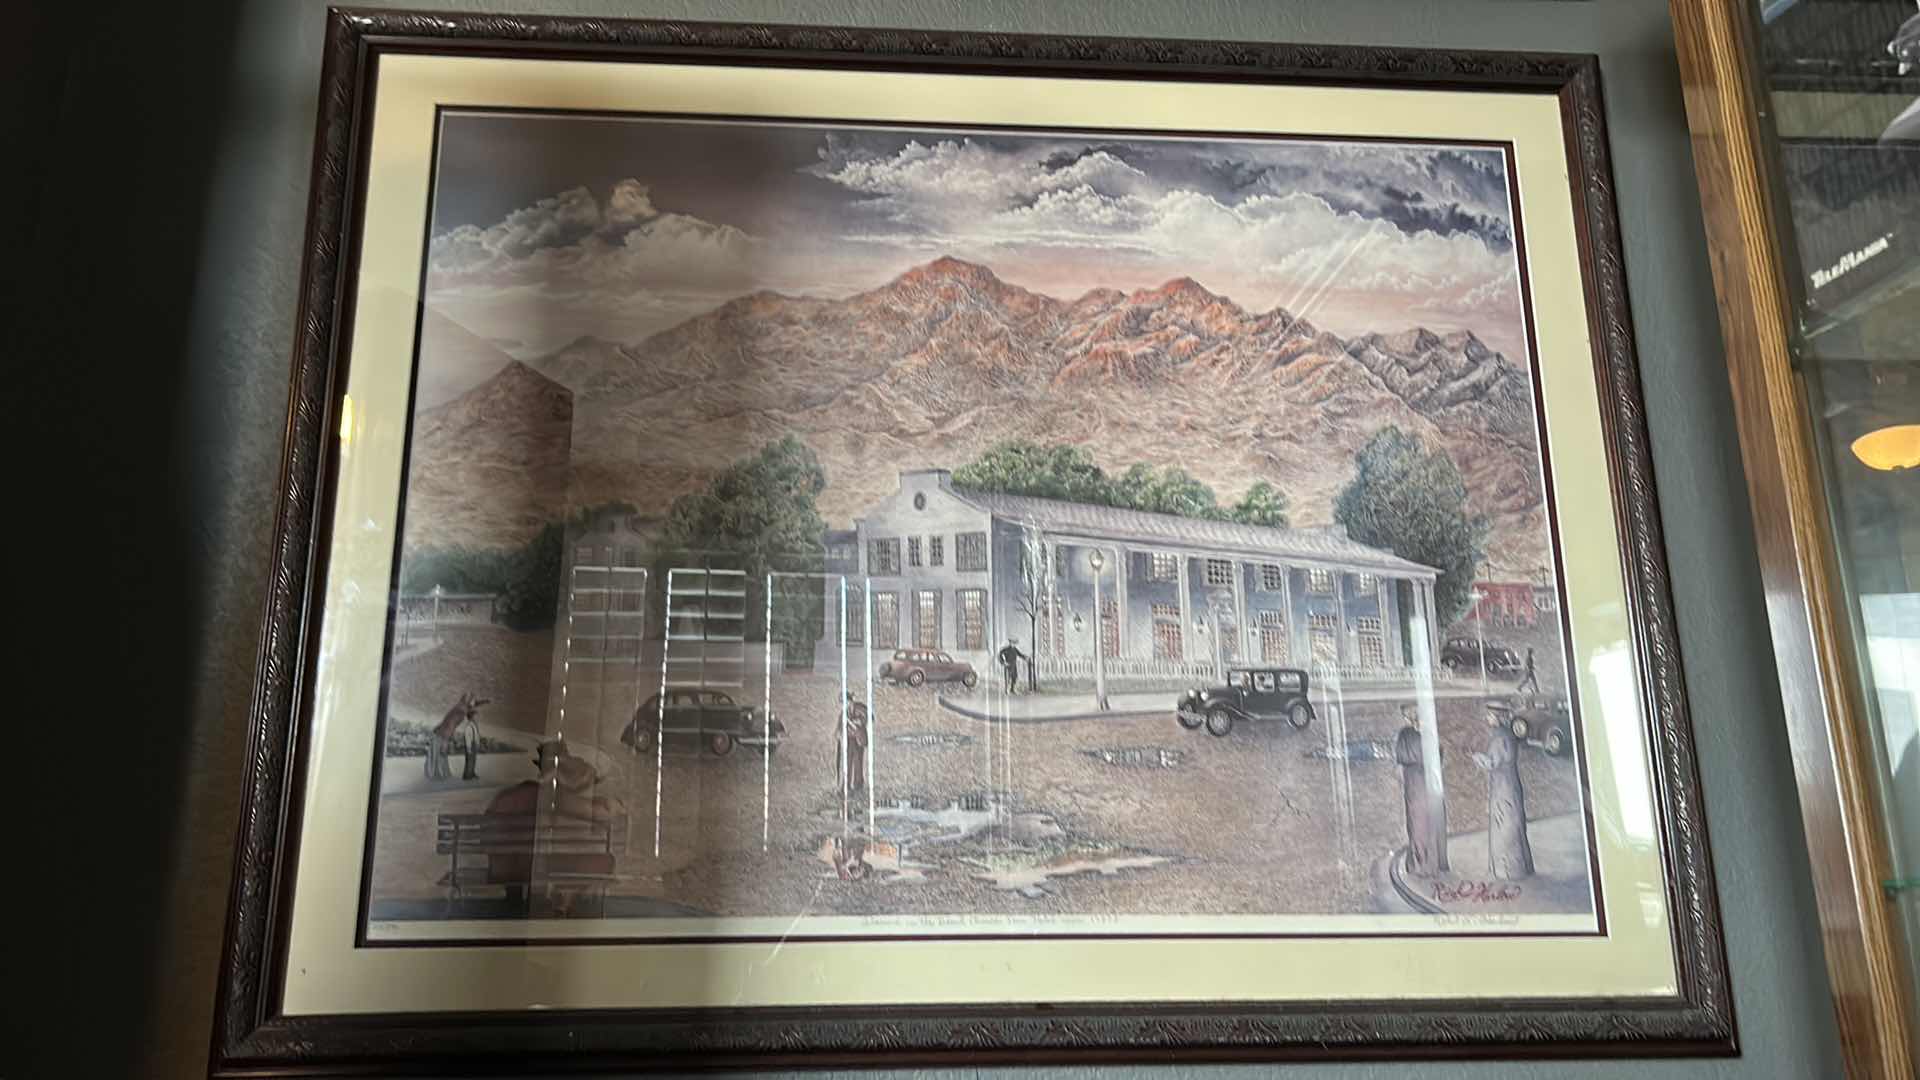 Photo 8 of WALL DECOR - SIGNED NUMBERED’ “DIAMOND IN THE DESERT BOULDER DAM HOTEL CIRCA 1937 FRAMED ARTWORK 43” x 32”